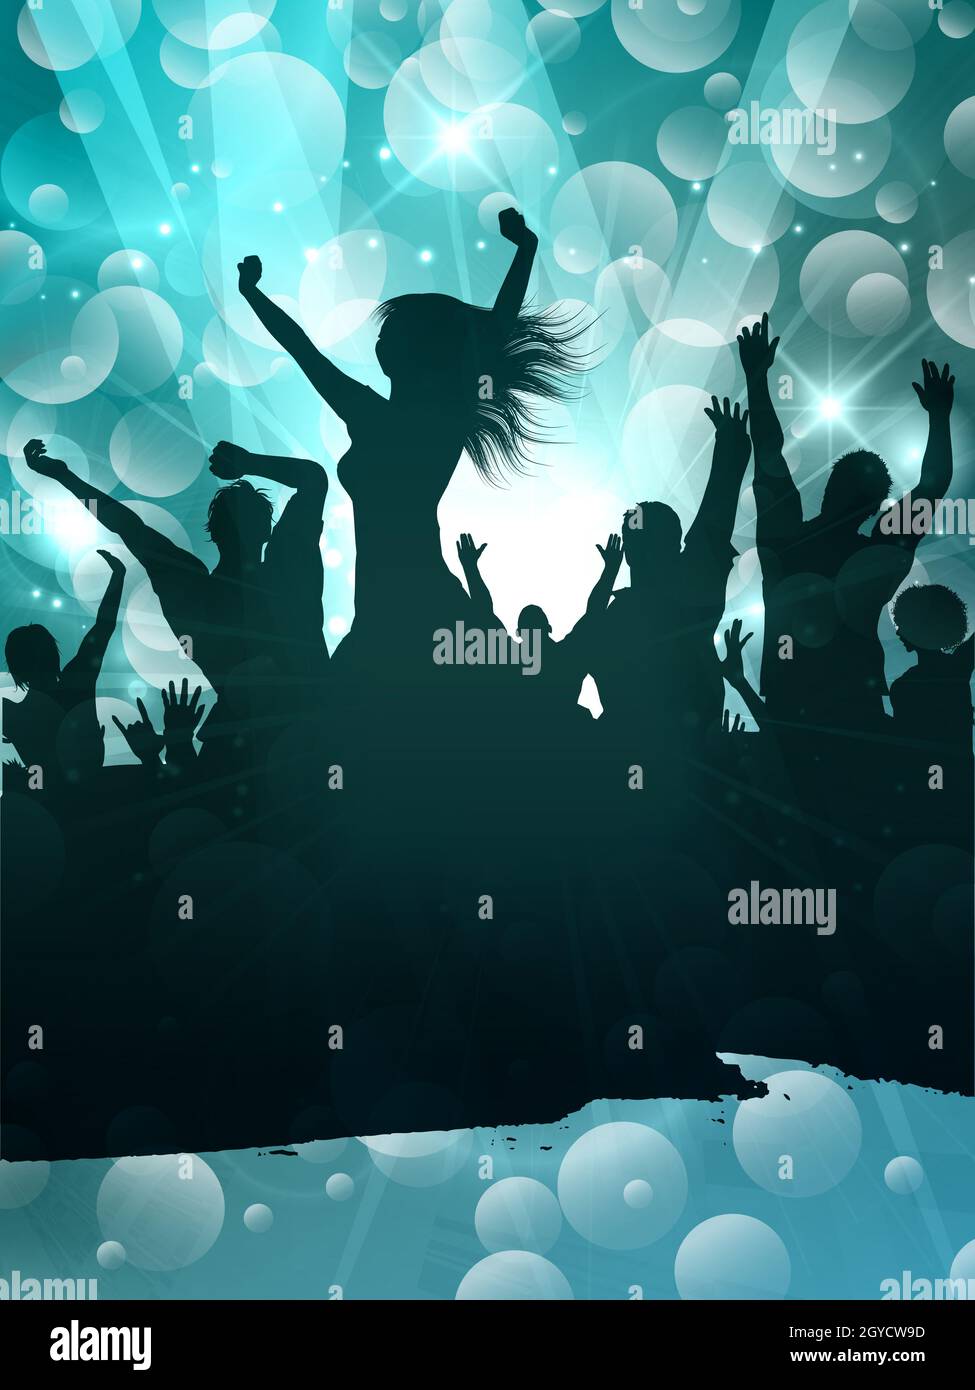 Grunge silhouette of a party crowd on an abstract background Stock Photo